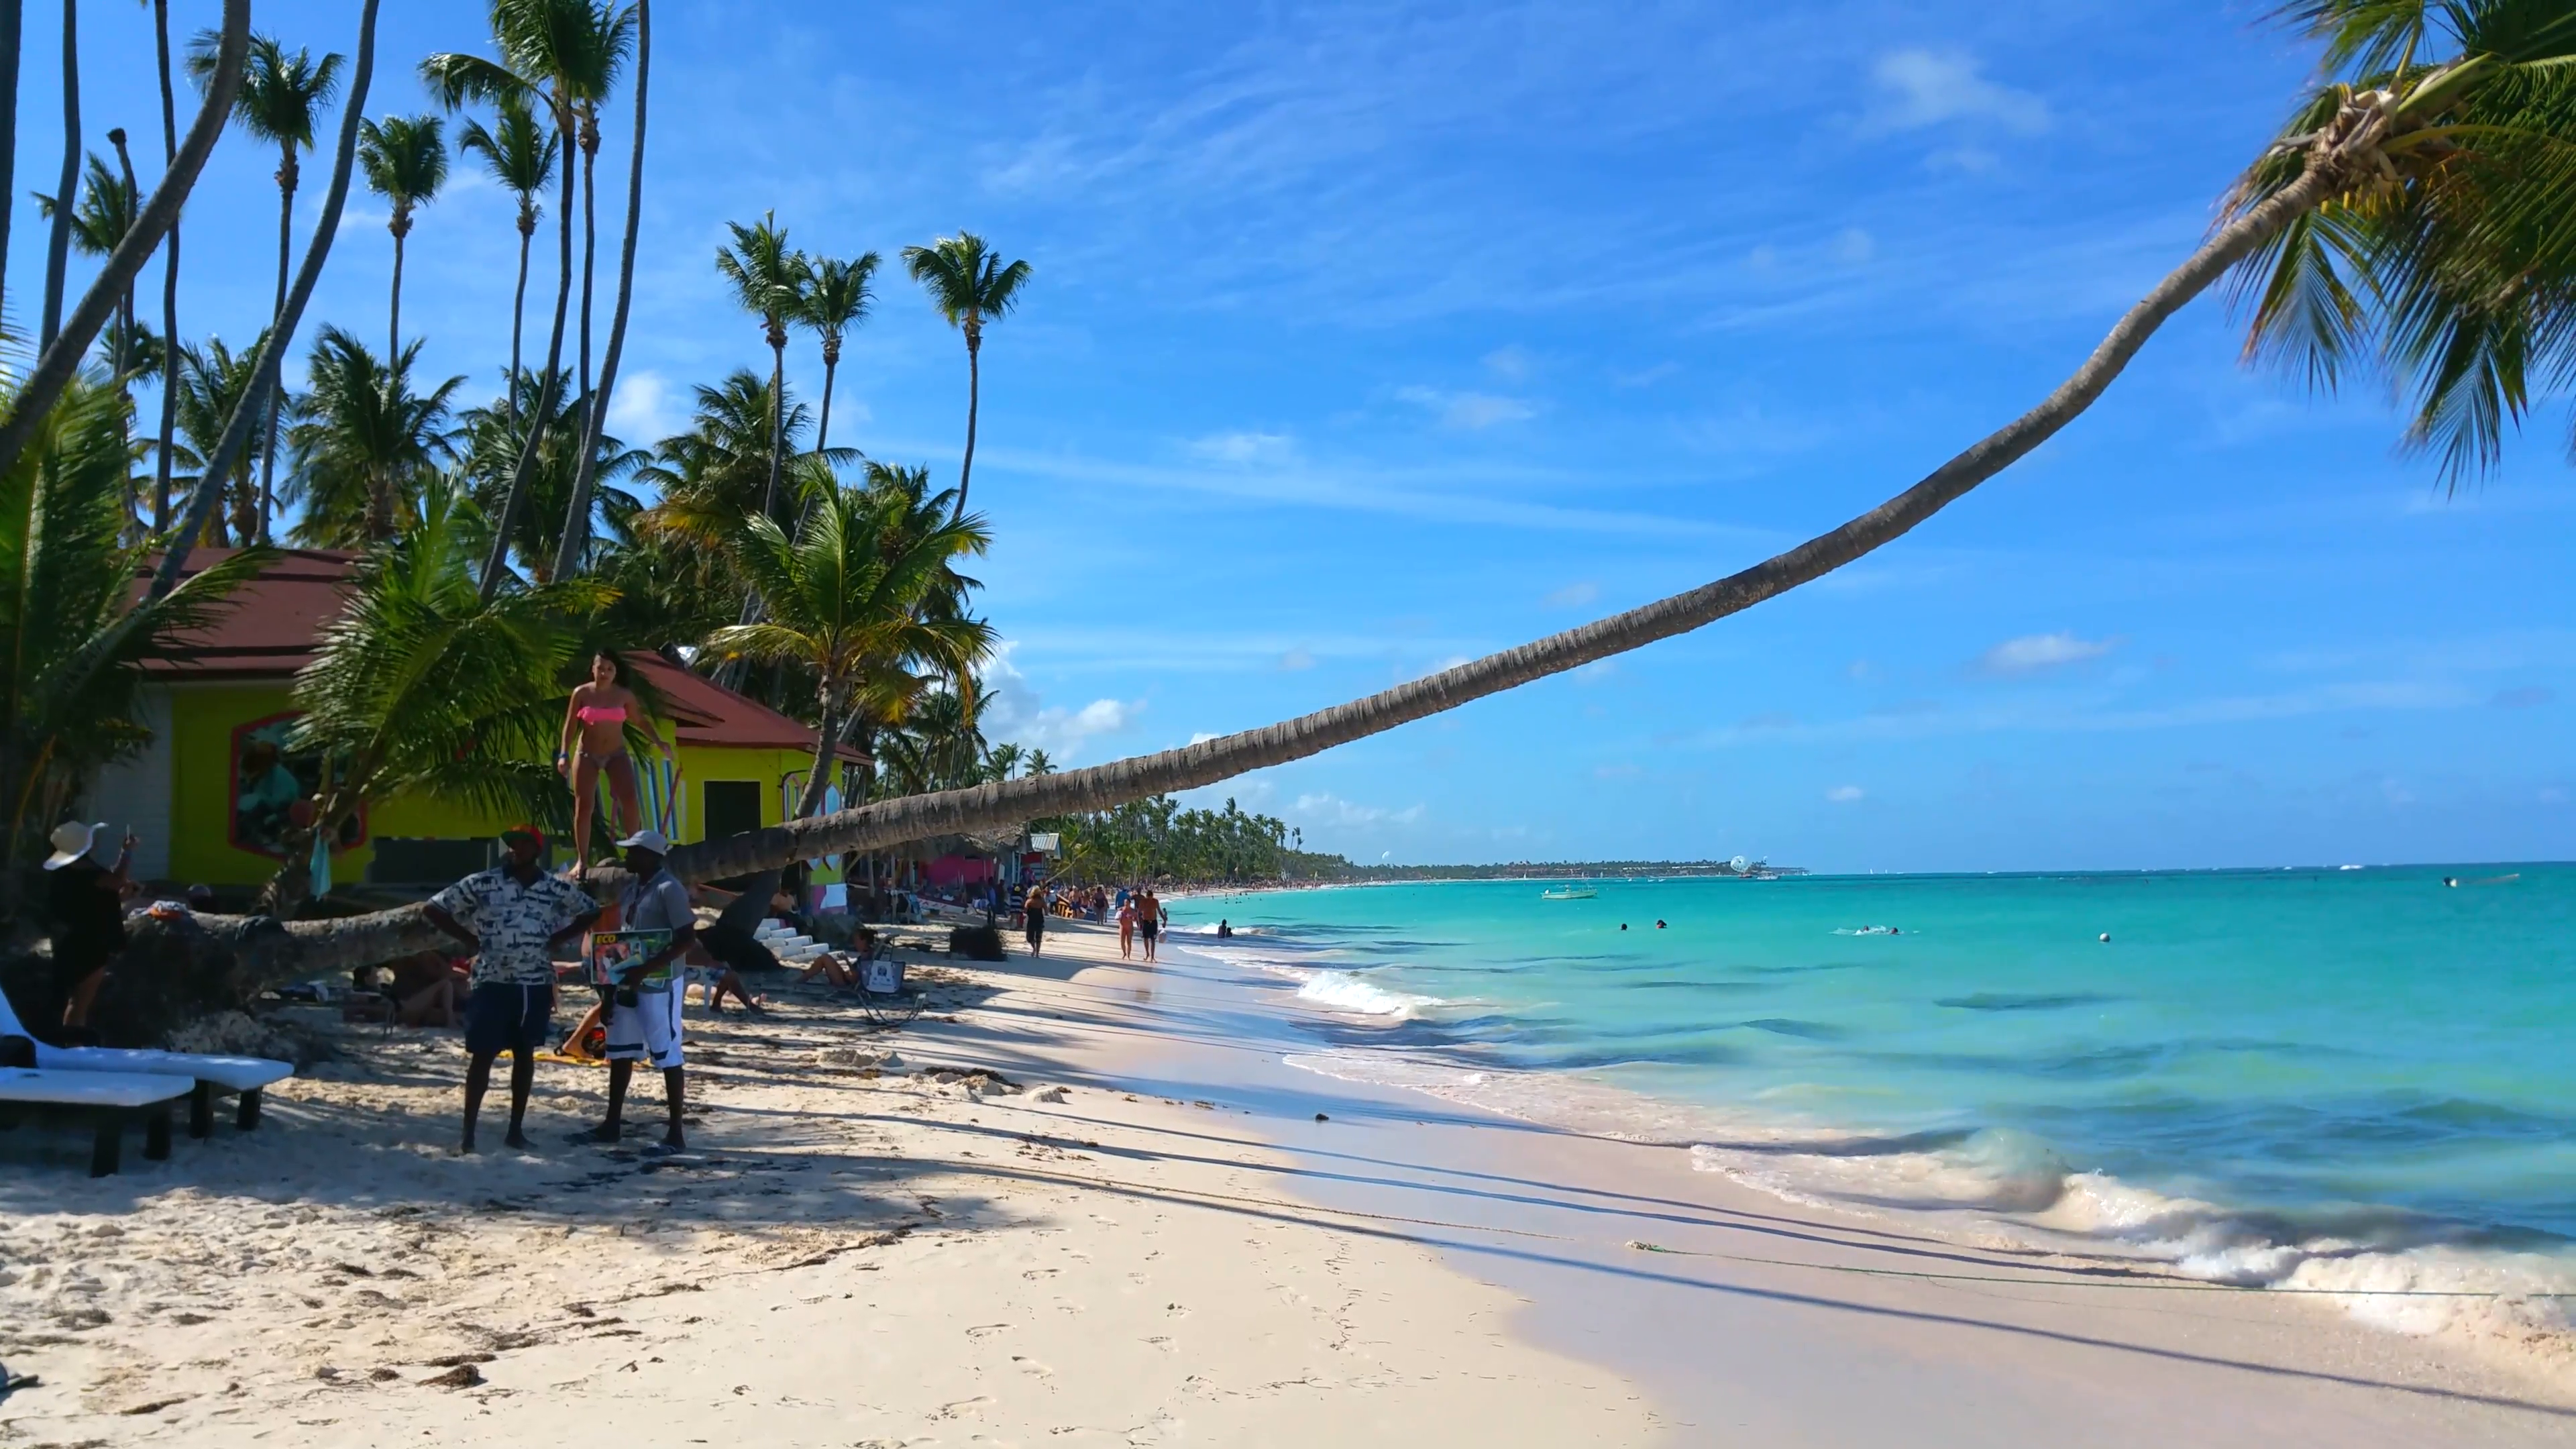 A view at Bavaro beach in Punta cana Stock Video Footage - Videoblocks